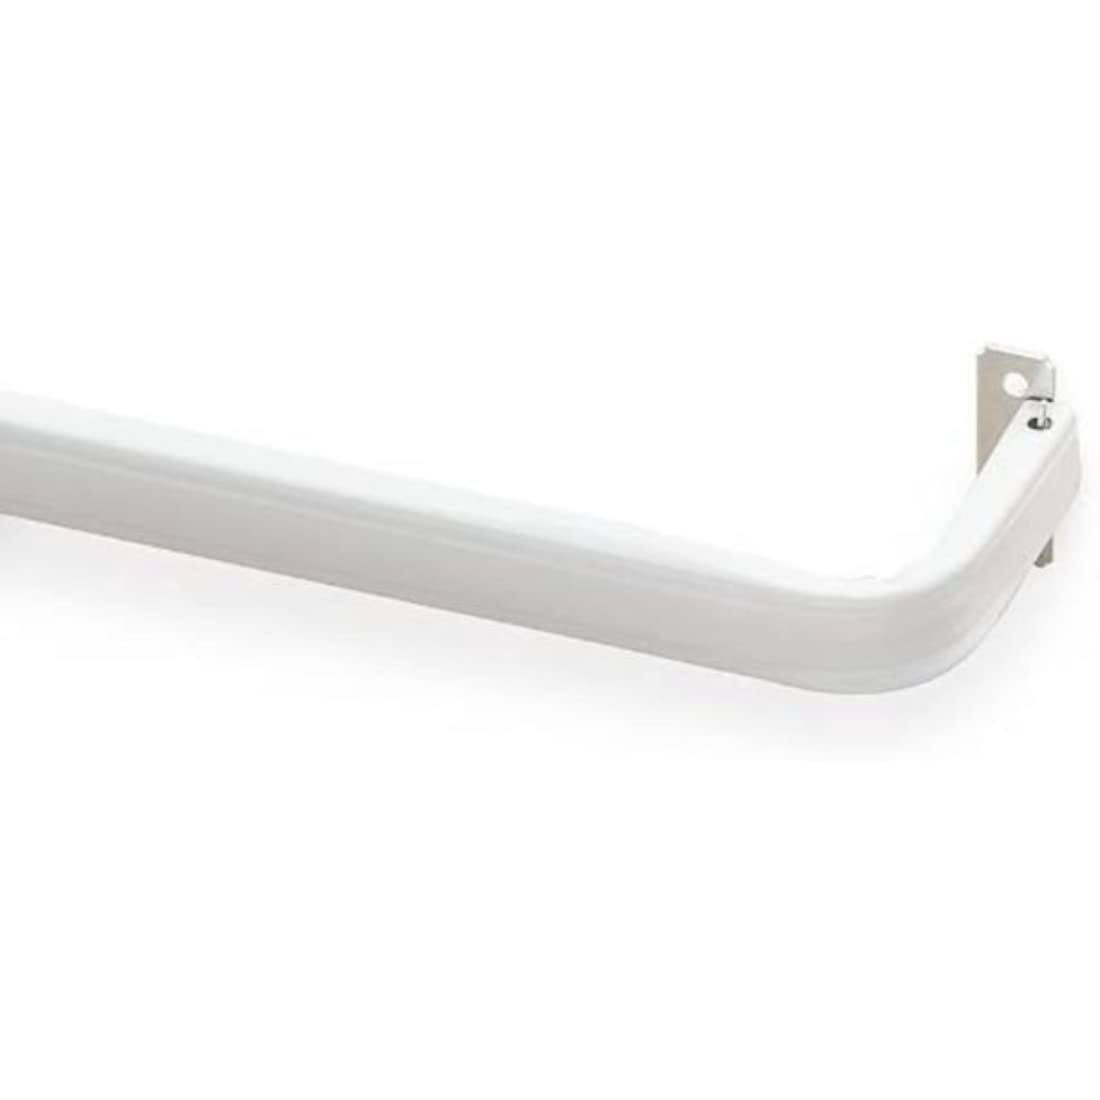 28 inch to 48 inch - Kirsch Super Duty Lockseam Curtain Rod with 1 1/4 inch Clearance, White